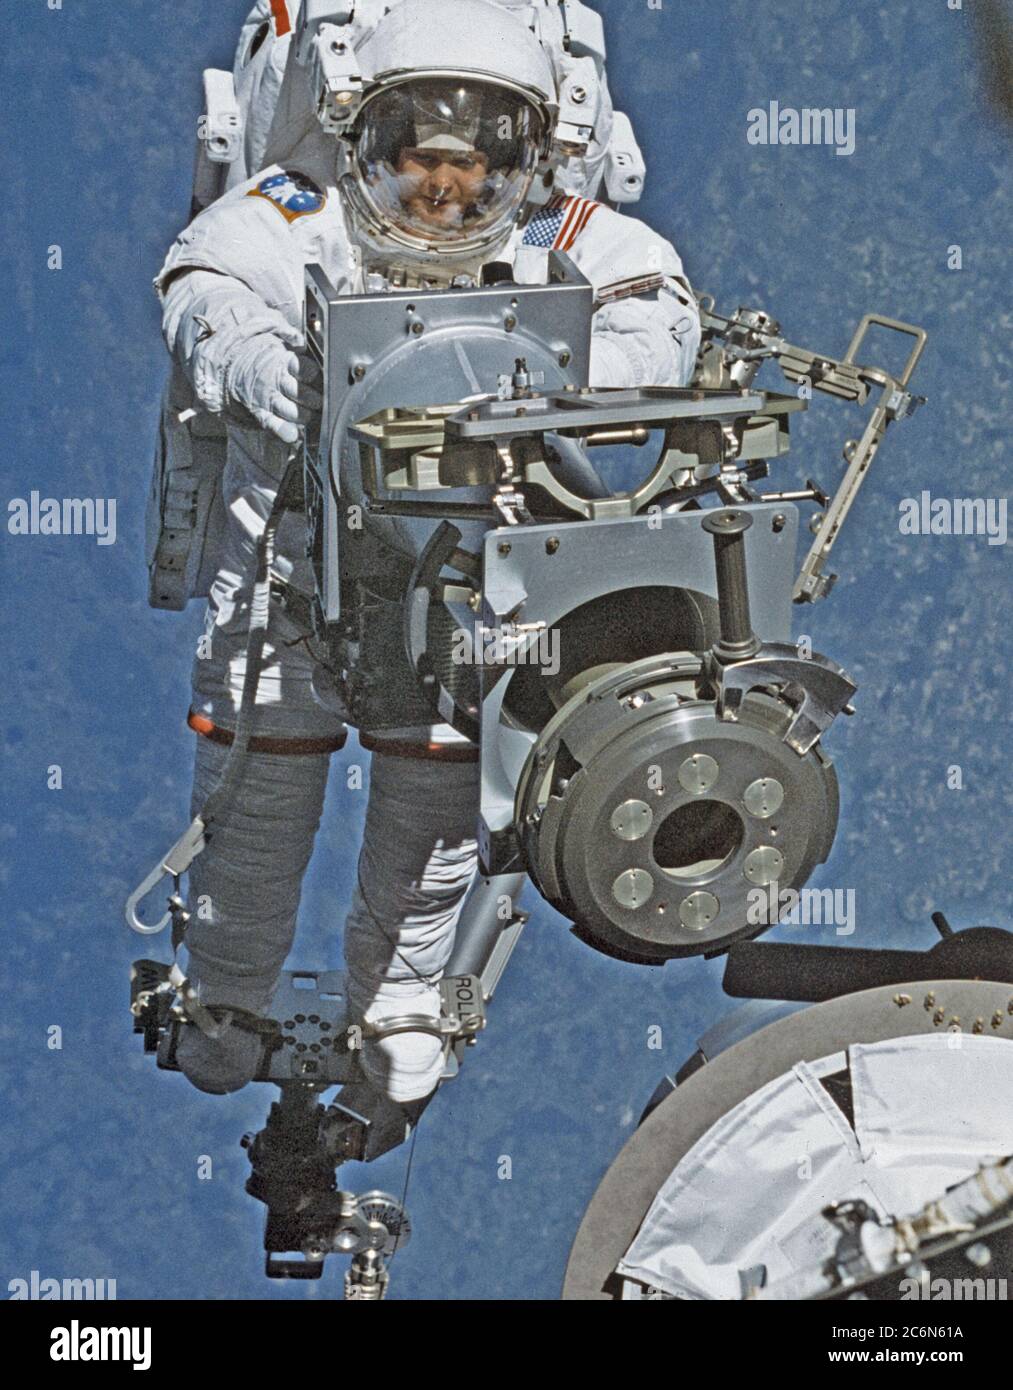 STS-96 ONBOARD PHOTO:  MISSION SPECIALIST JERNIGAN, TAMARA TOTES PART OF A RUSSIAN BUILT CRANE CALLED STRELA.  JERNIGANS FEET ARE ANCHORED ON A MOBILE FOOT RESTRAINT CONNECTED  TO THE SHUTTLES REMOTE MANIPULATOR SYSTEM (RMS) Stock Photo